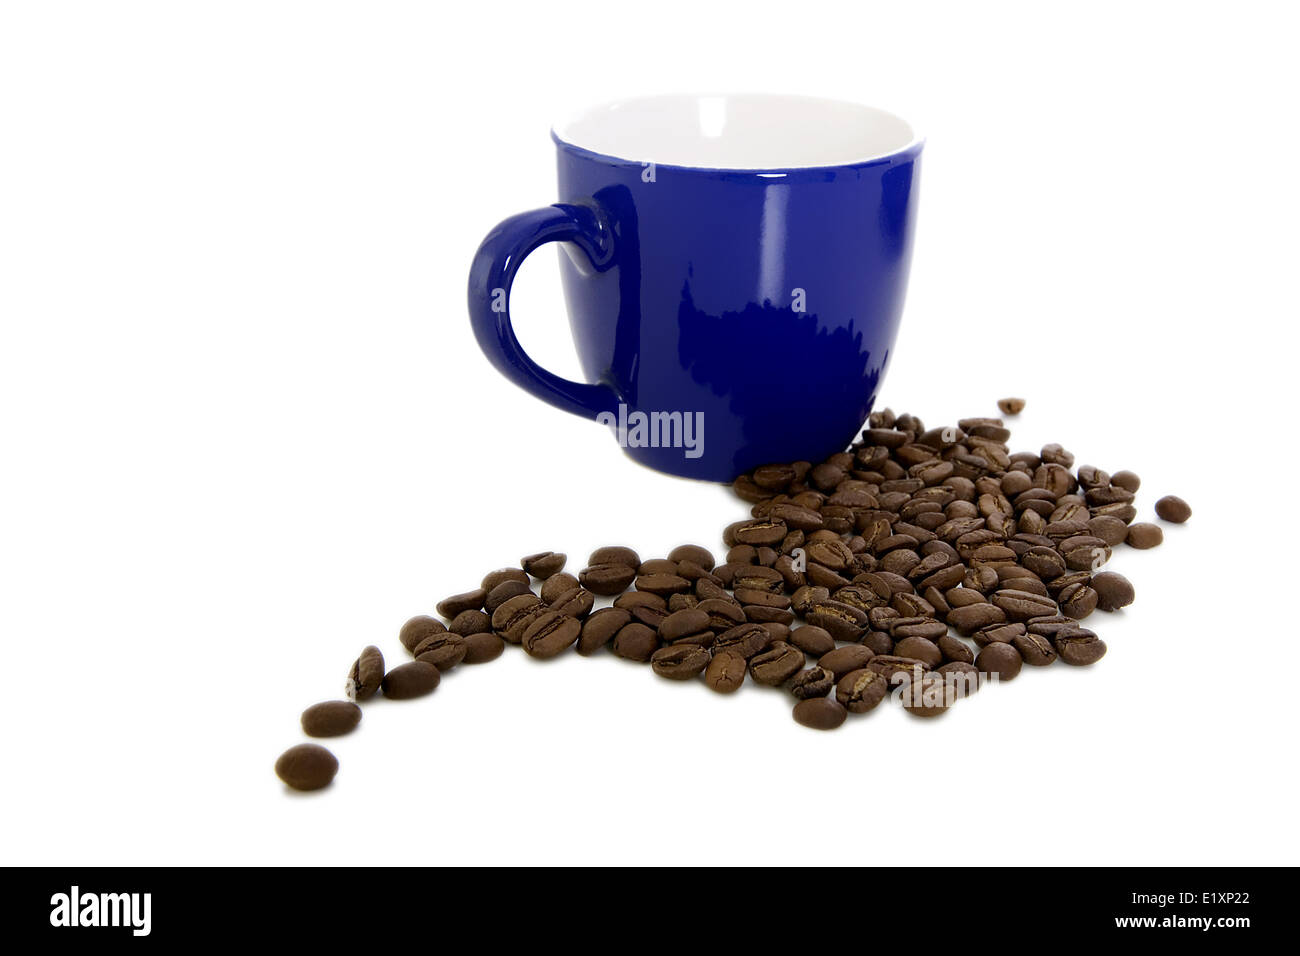 Dark blue mug and scattered coffee Stock Photo